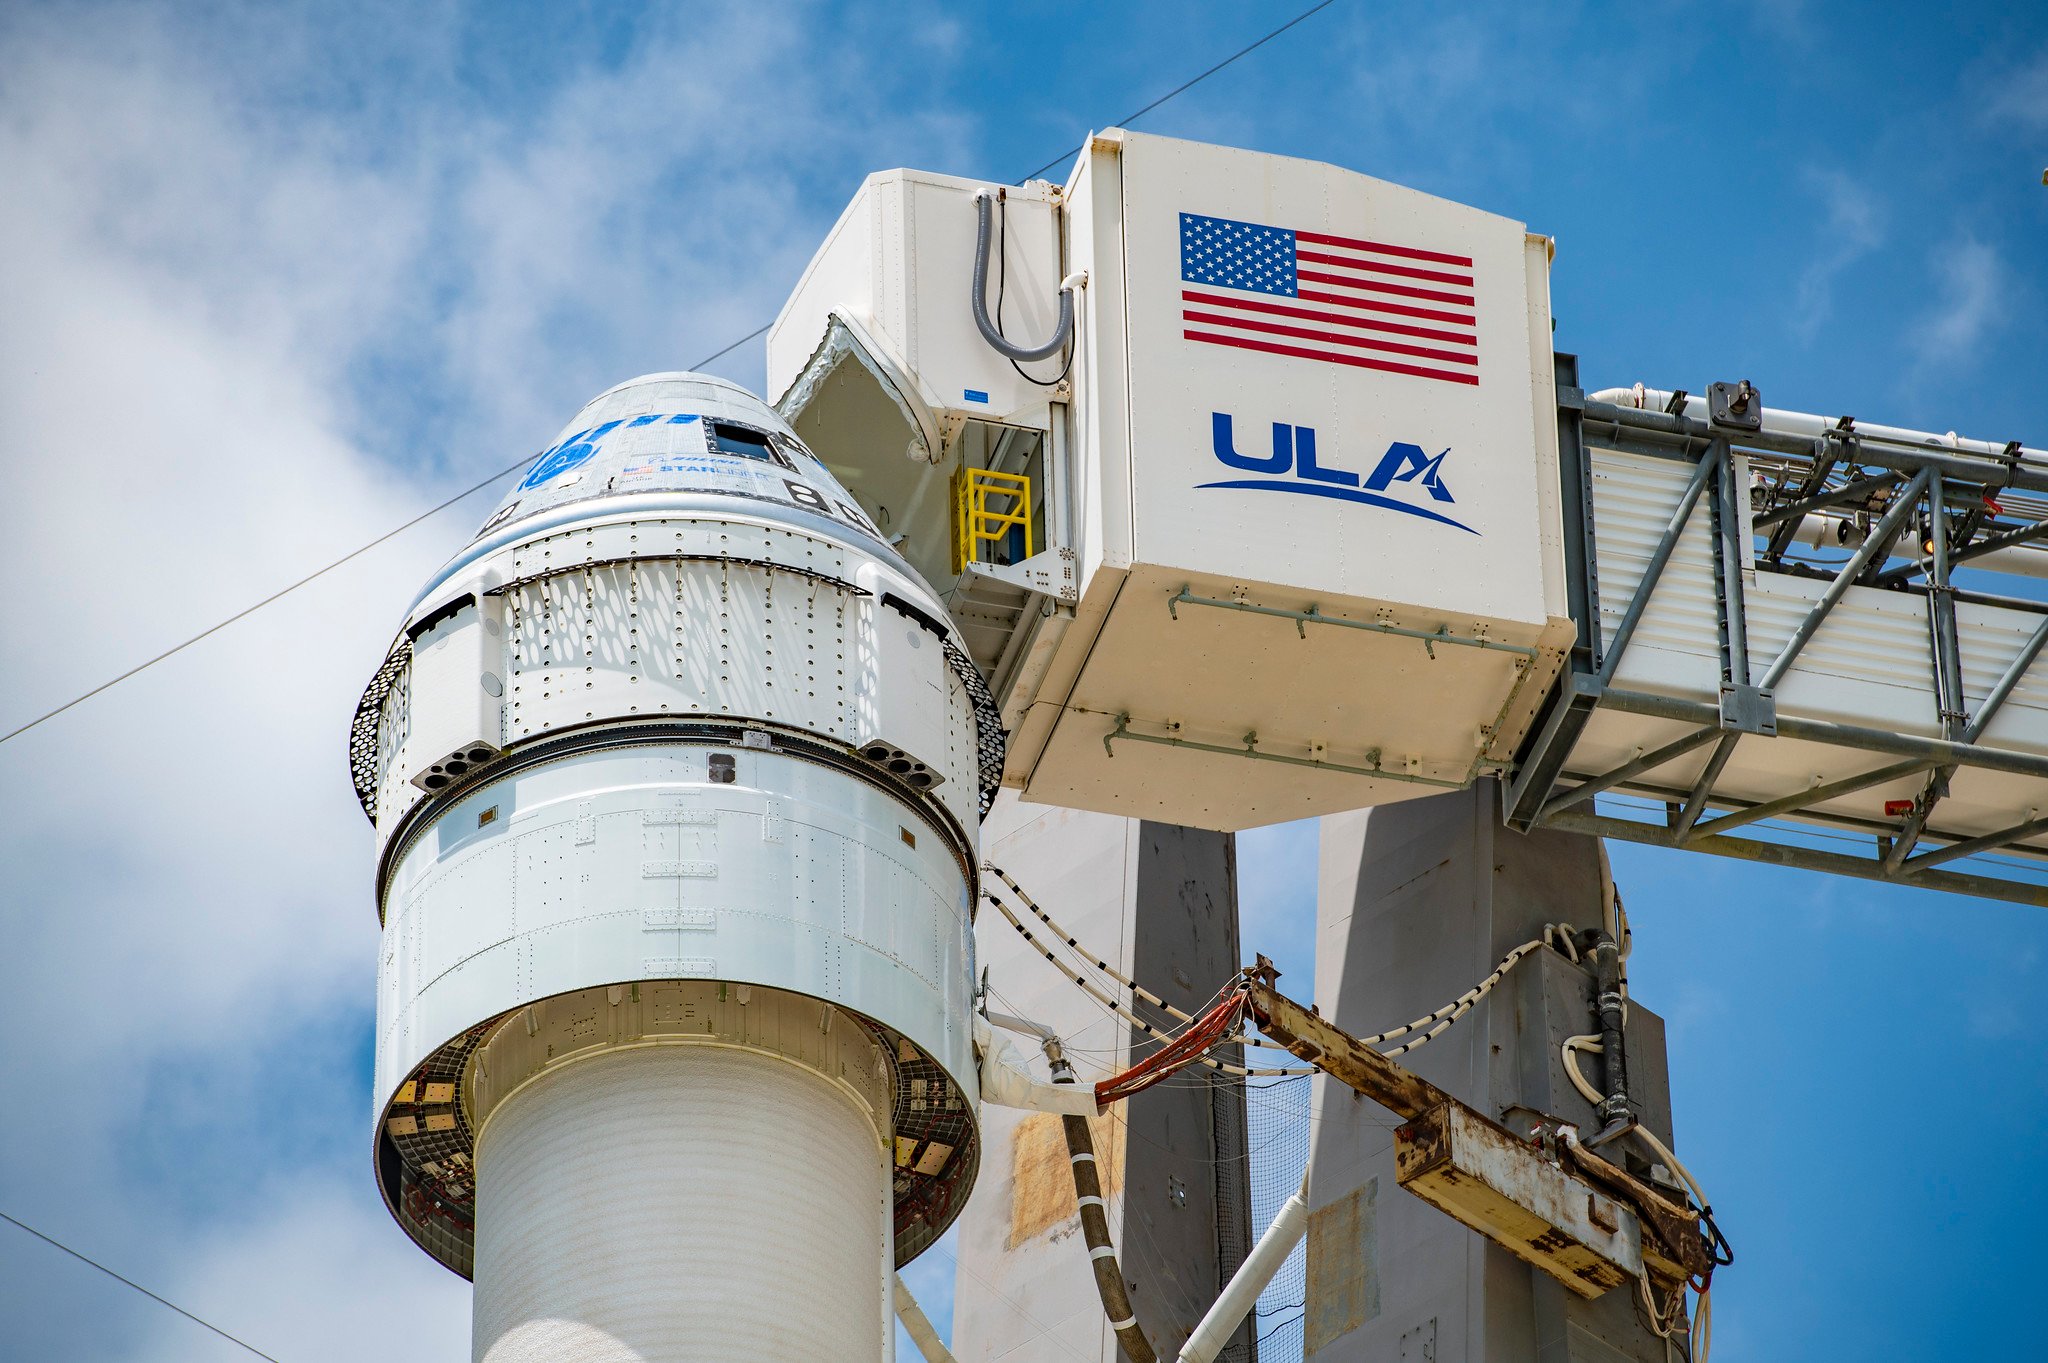 Atlas V will launch Starliner on its second Orbital Flight Test (OFT-2). Photo by United Launch Alliance